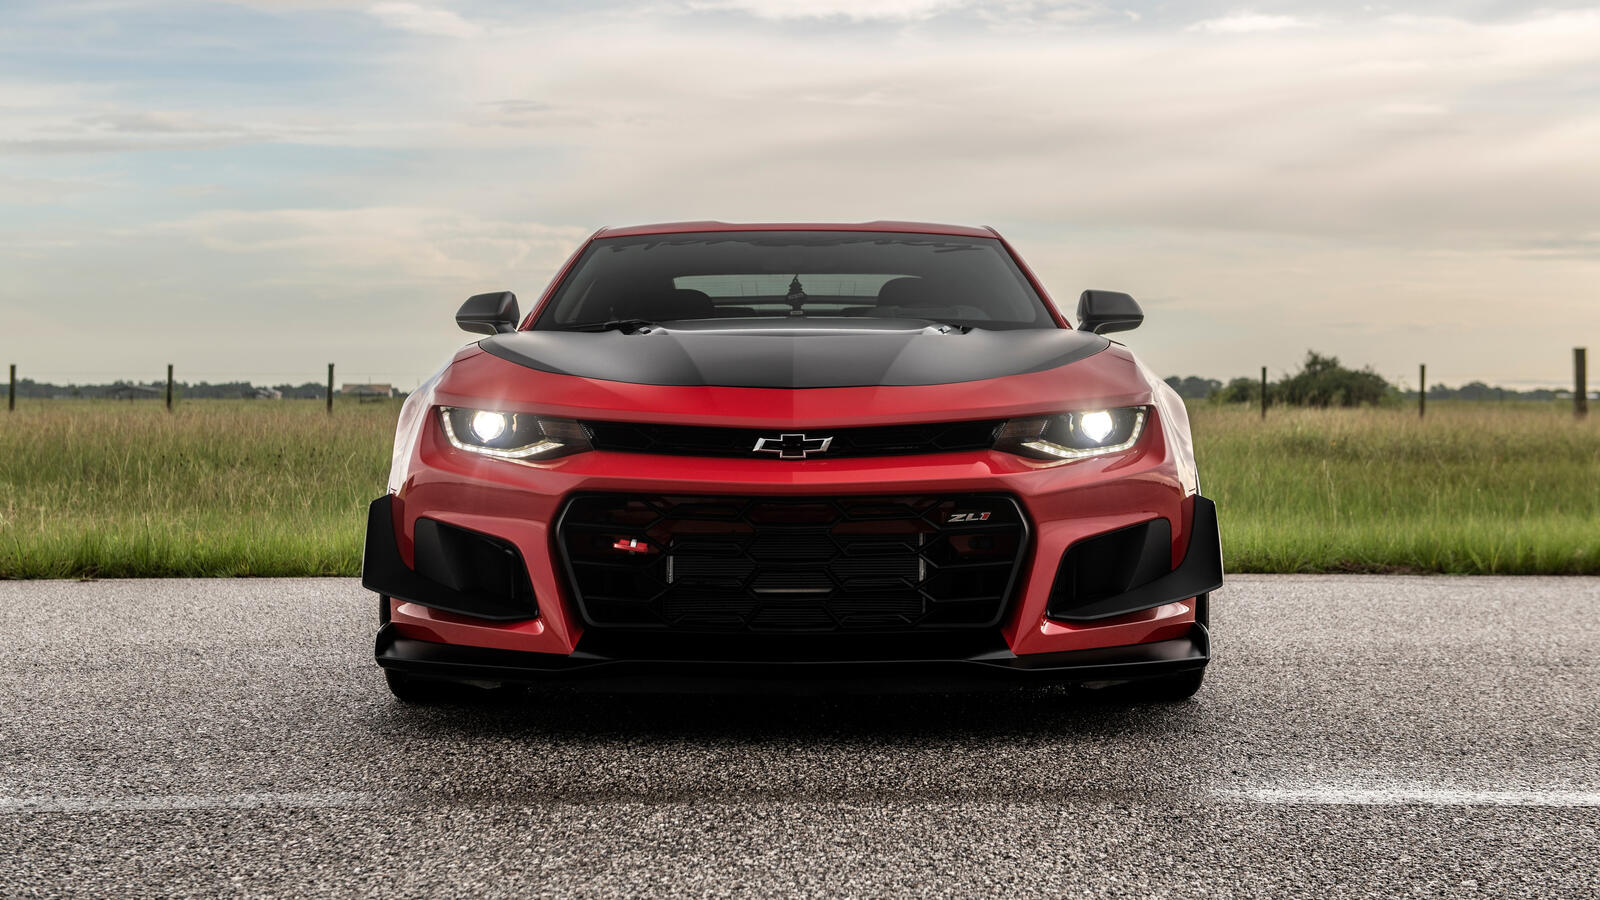 Wallpapers red eyes front view muscle cars on the desktop